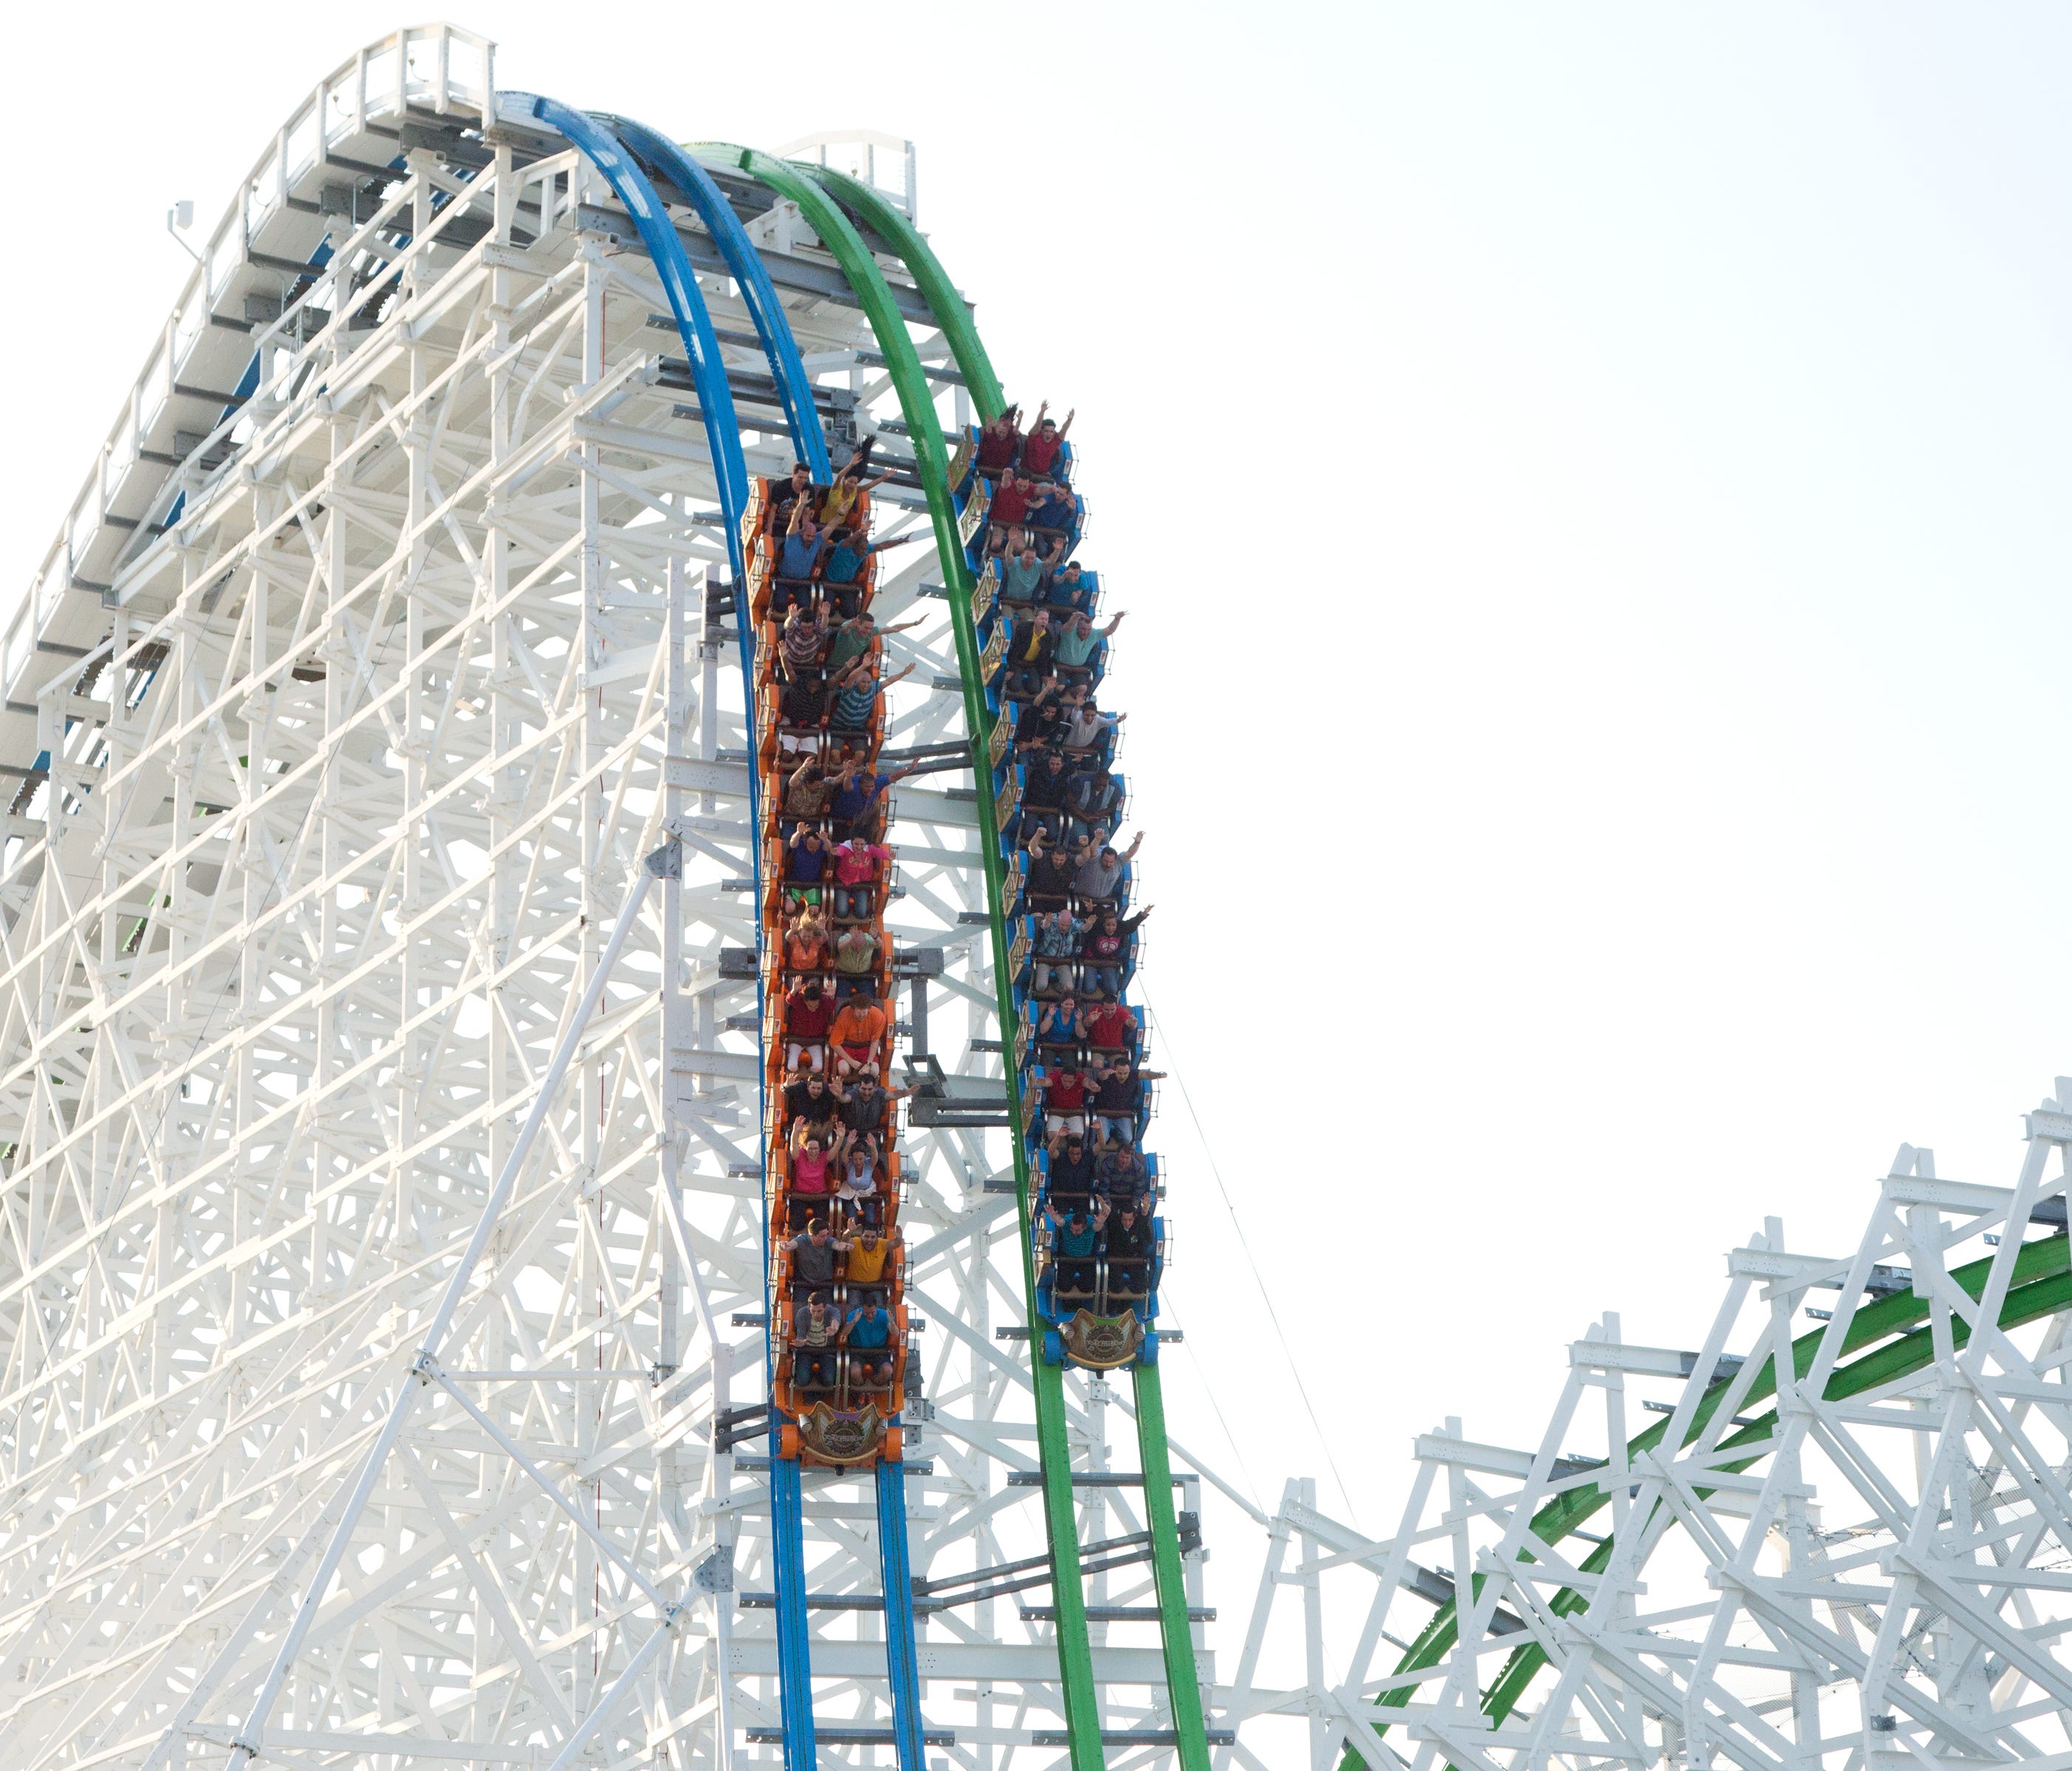 The hybrid wooden-steel coasters they have created, such as Twisted Colossus at Six Flags Magic Mountain in Calif., have been remarkably smooth.